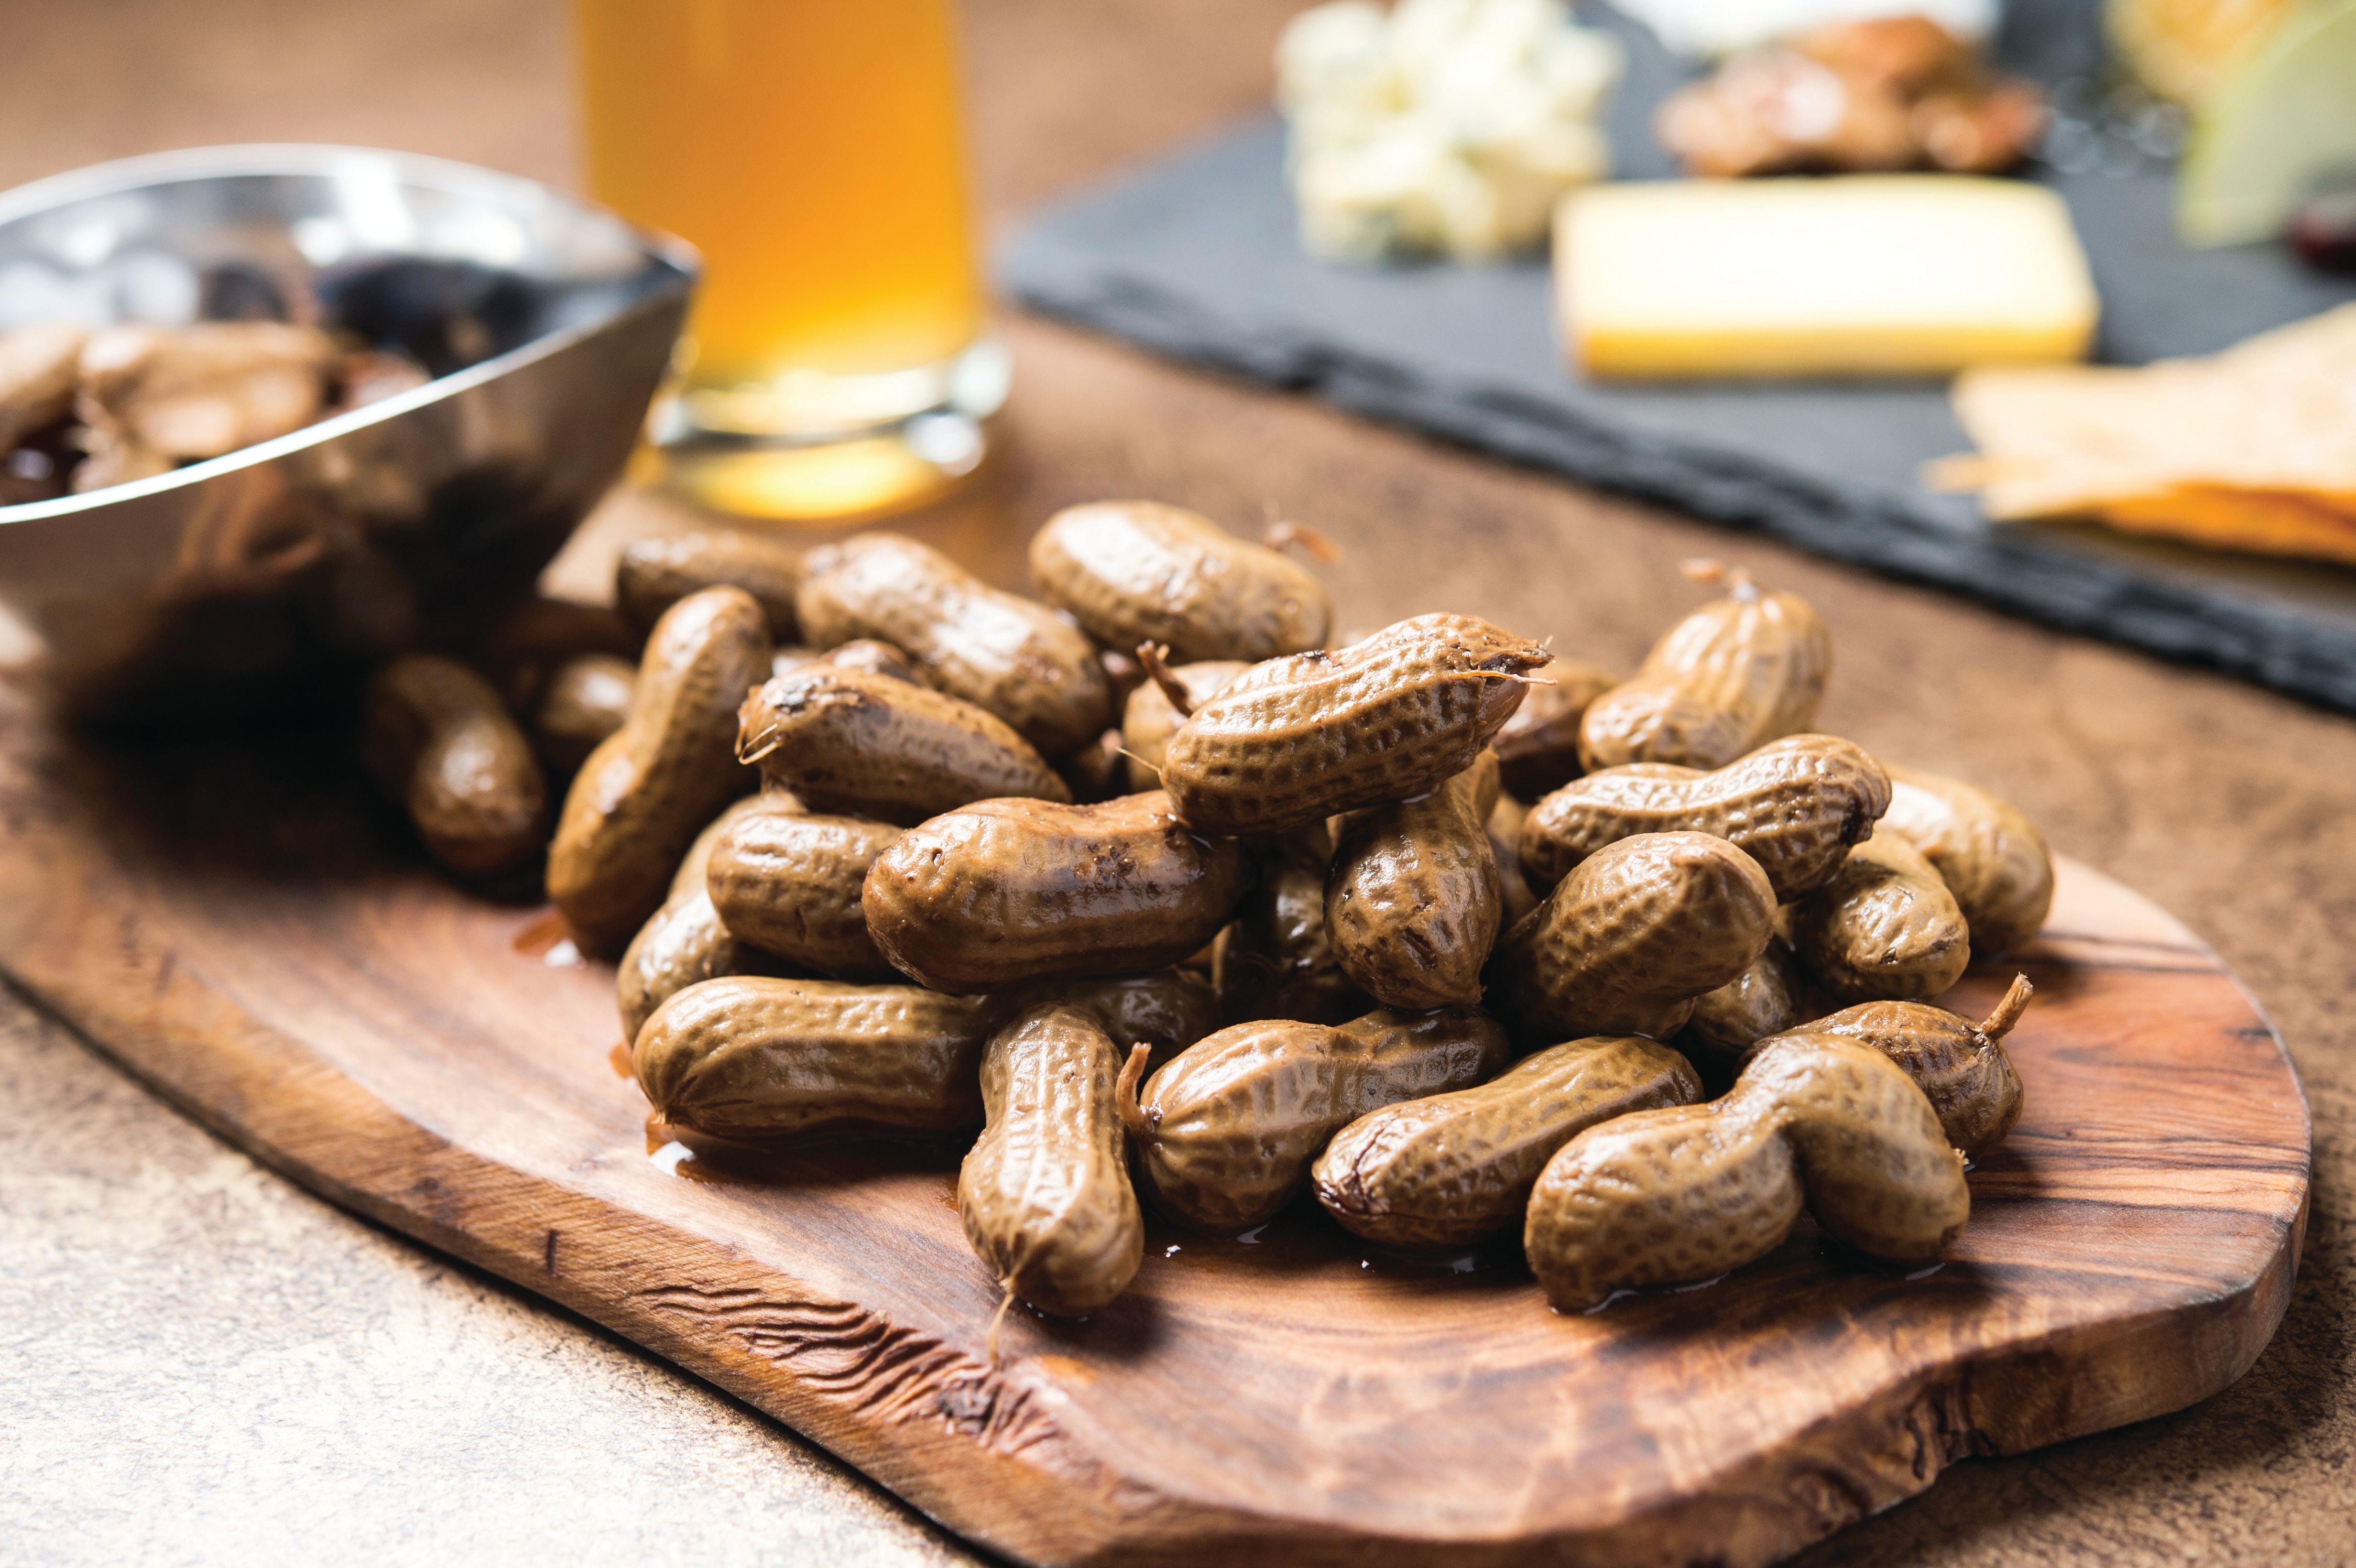 Boiled peanuts on a wooden board